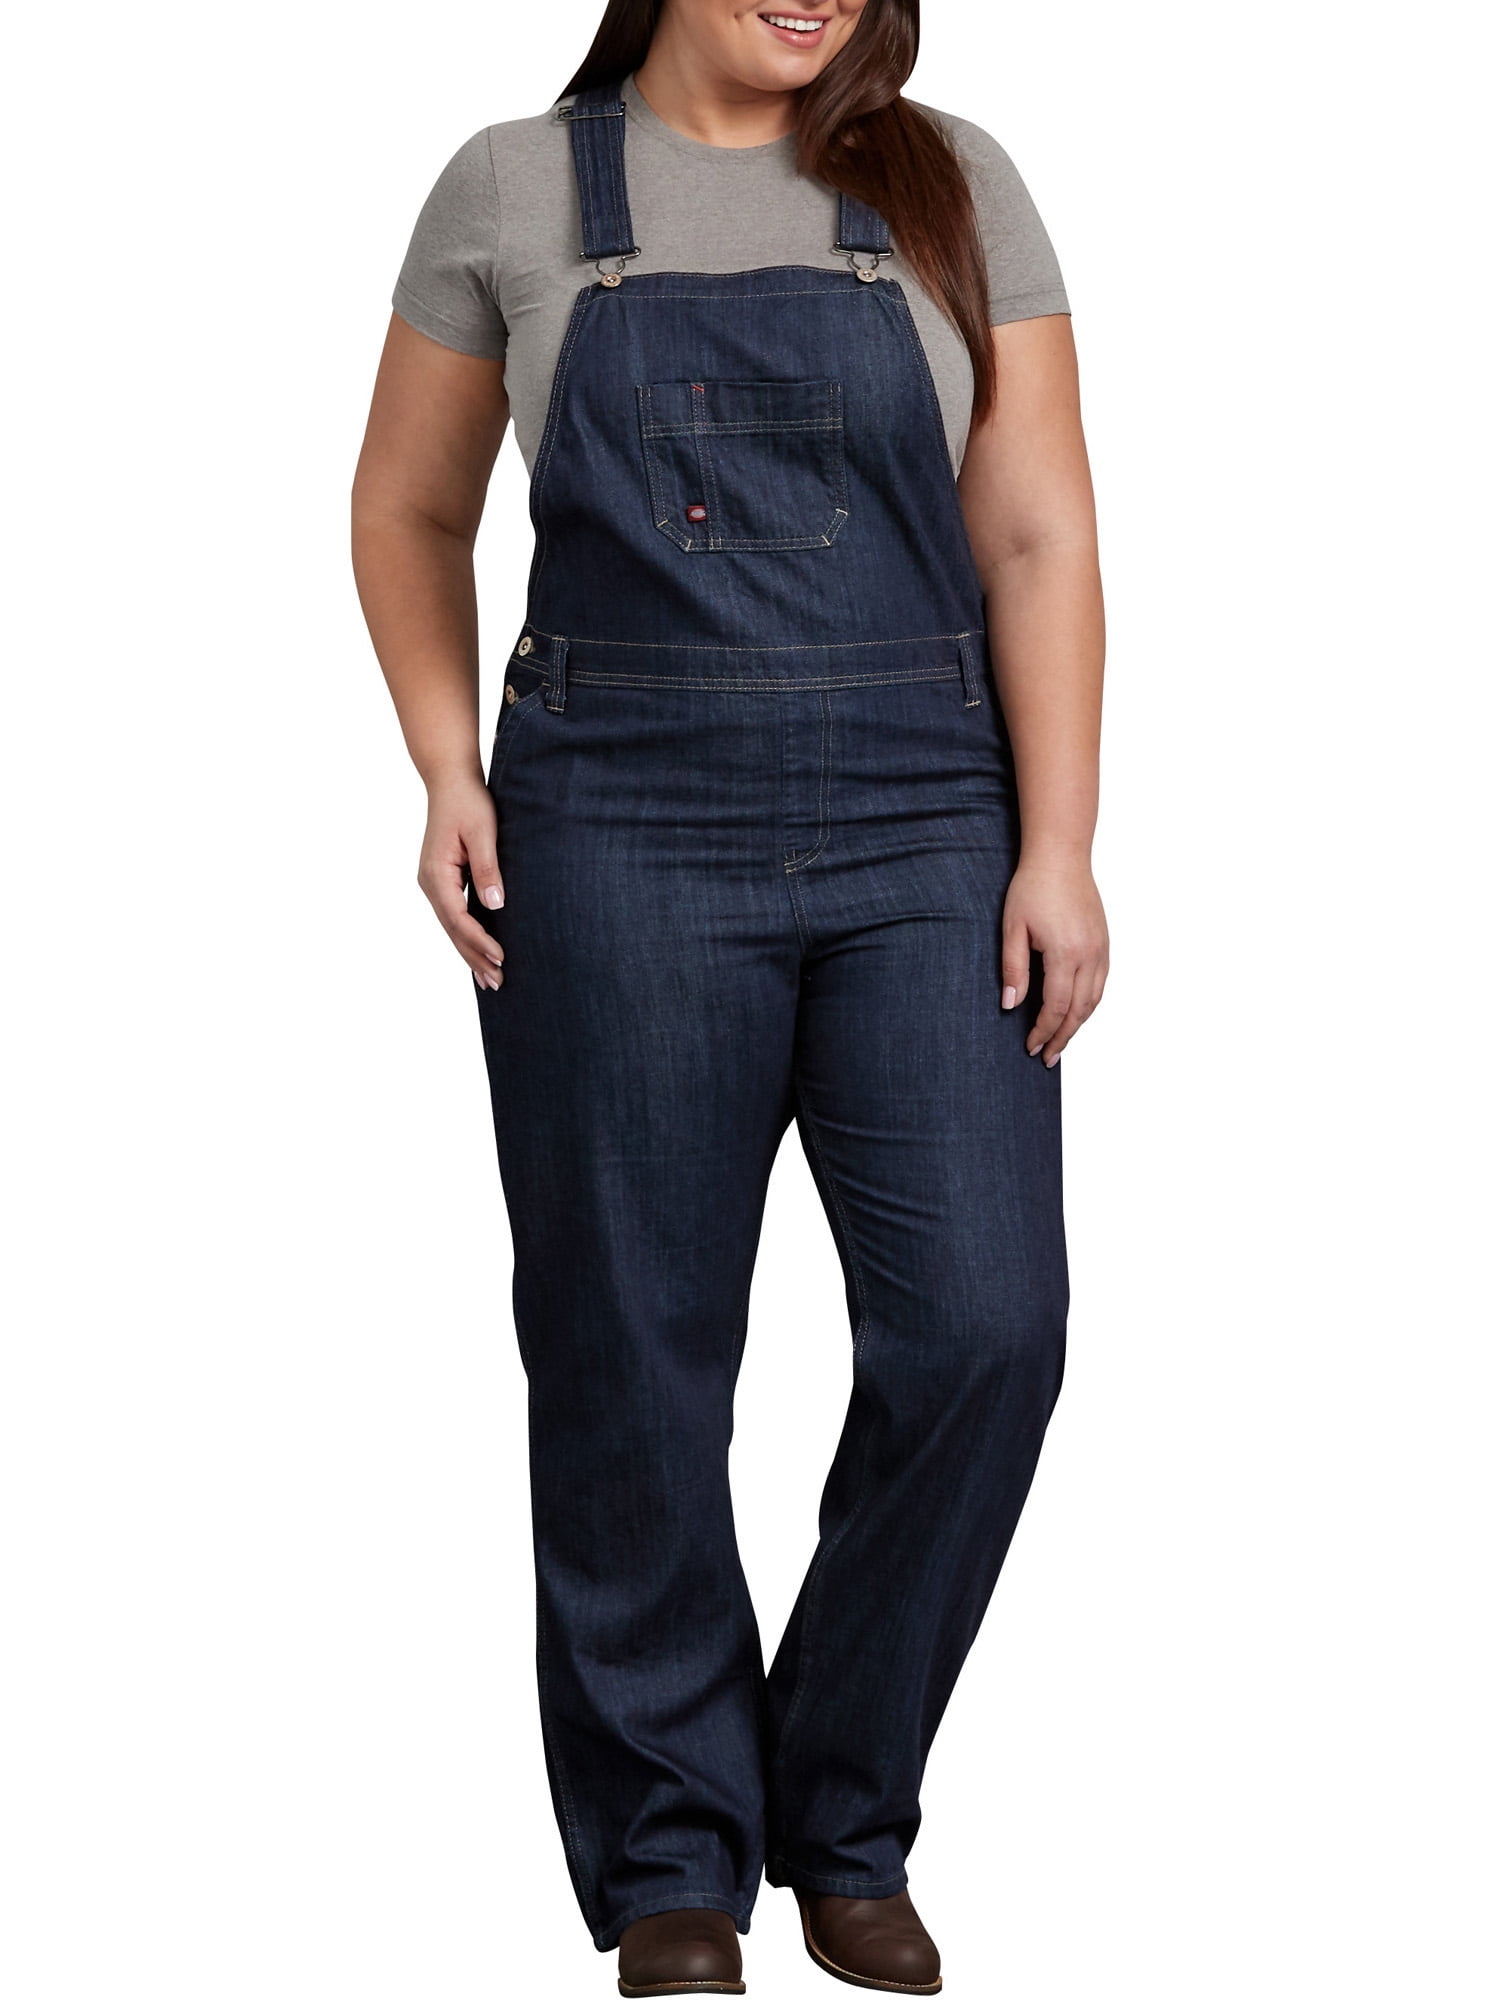 jean overall dress plus size